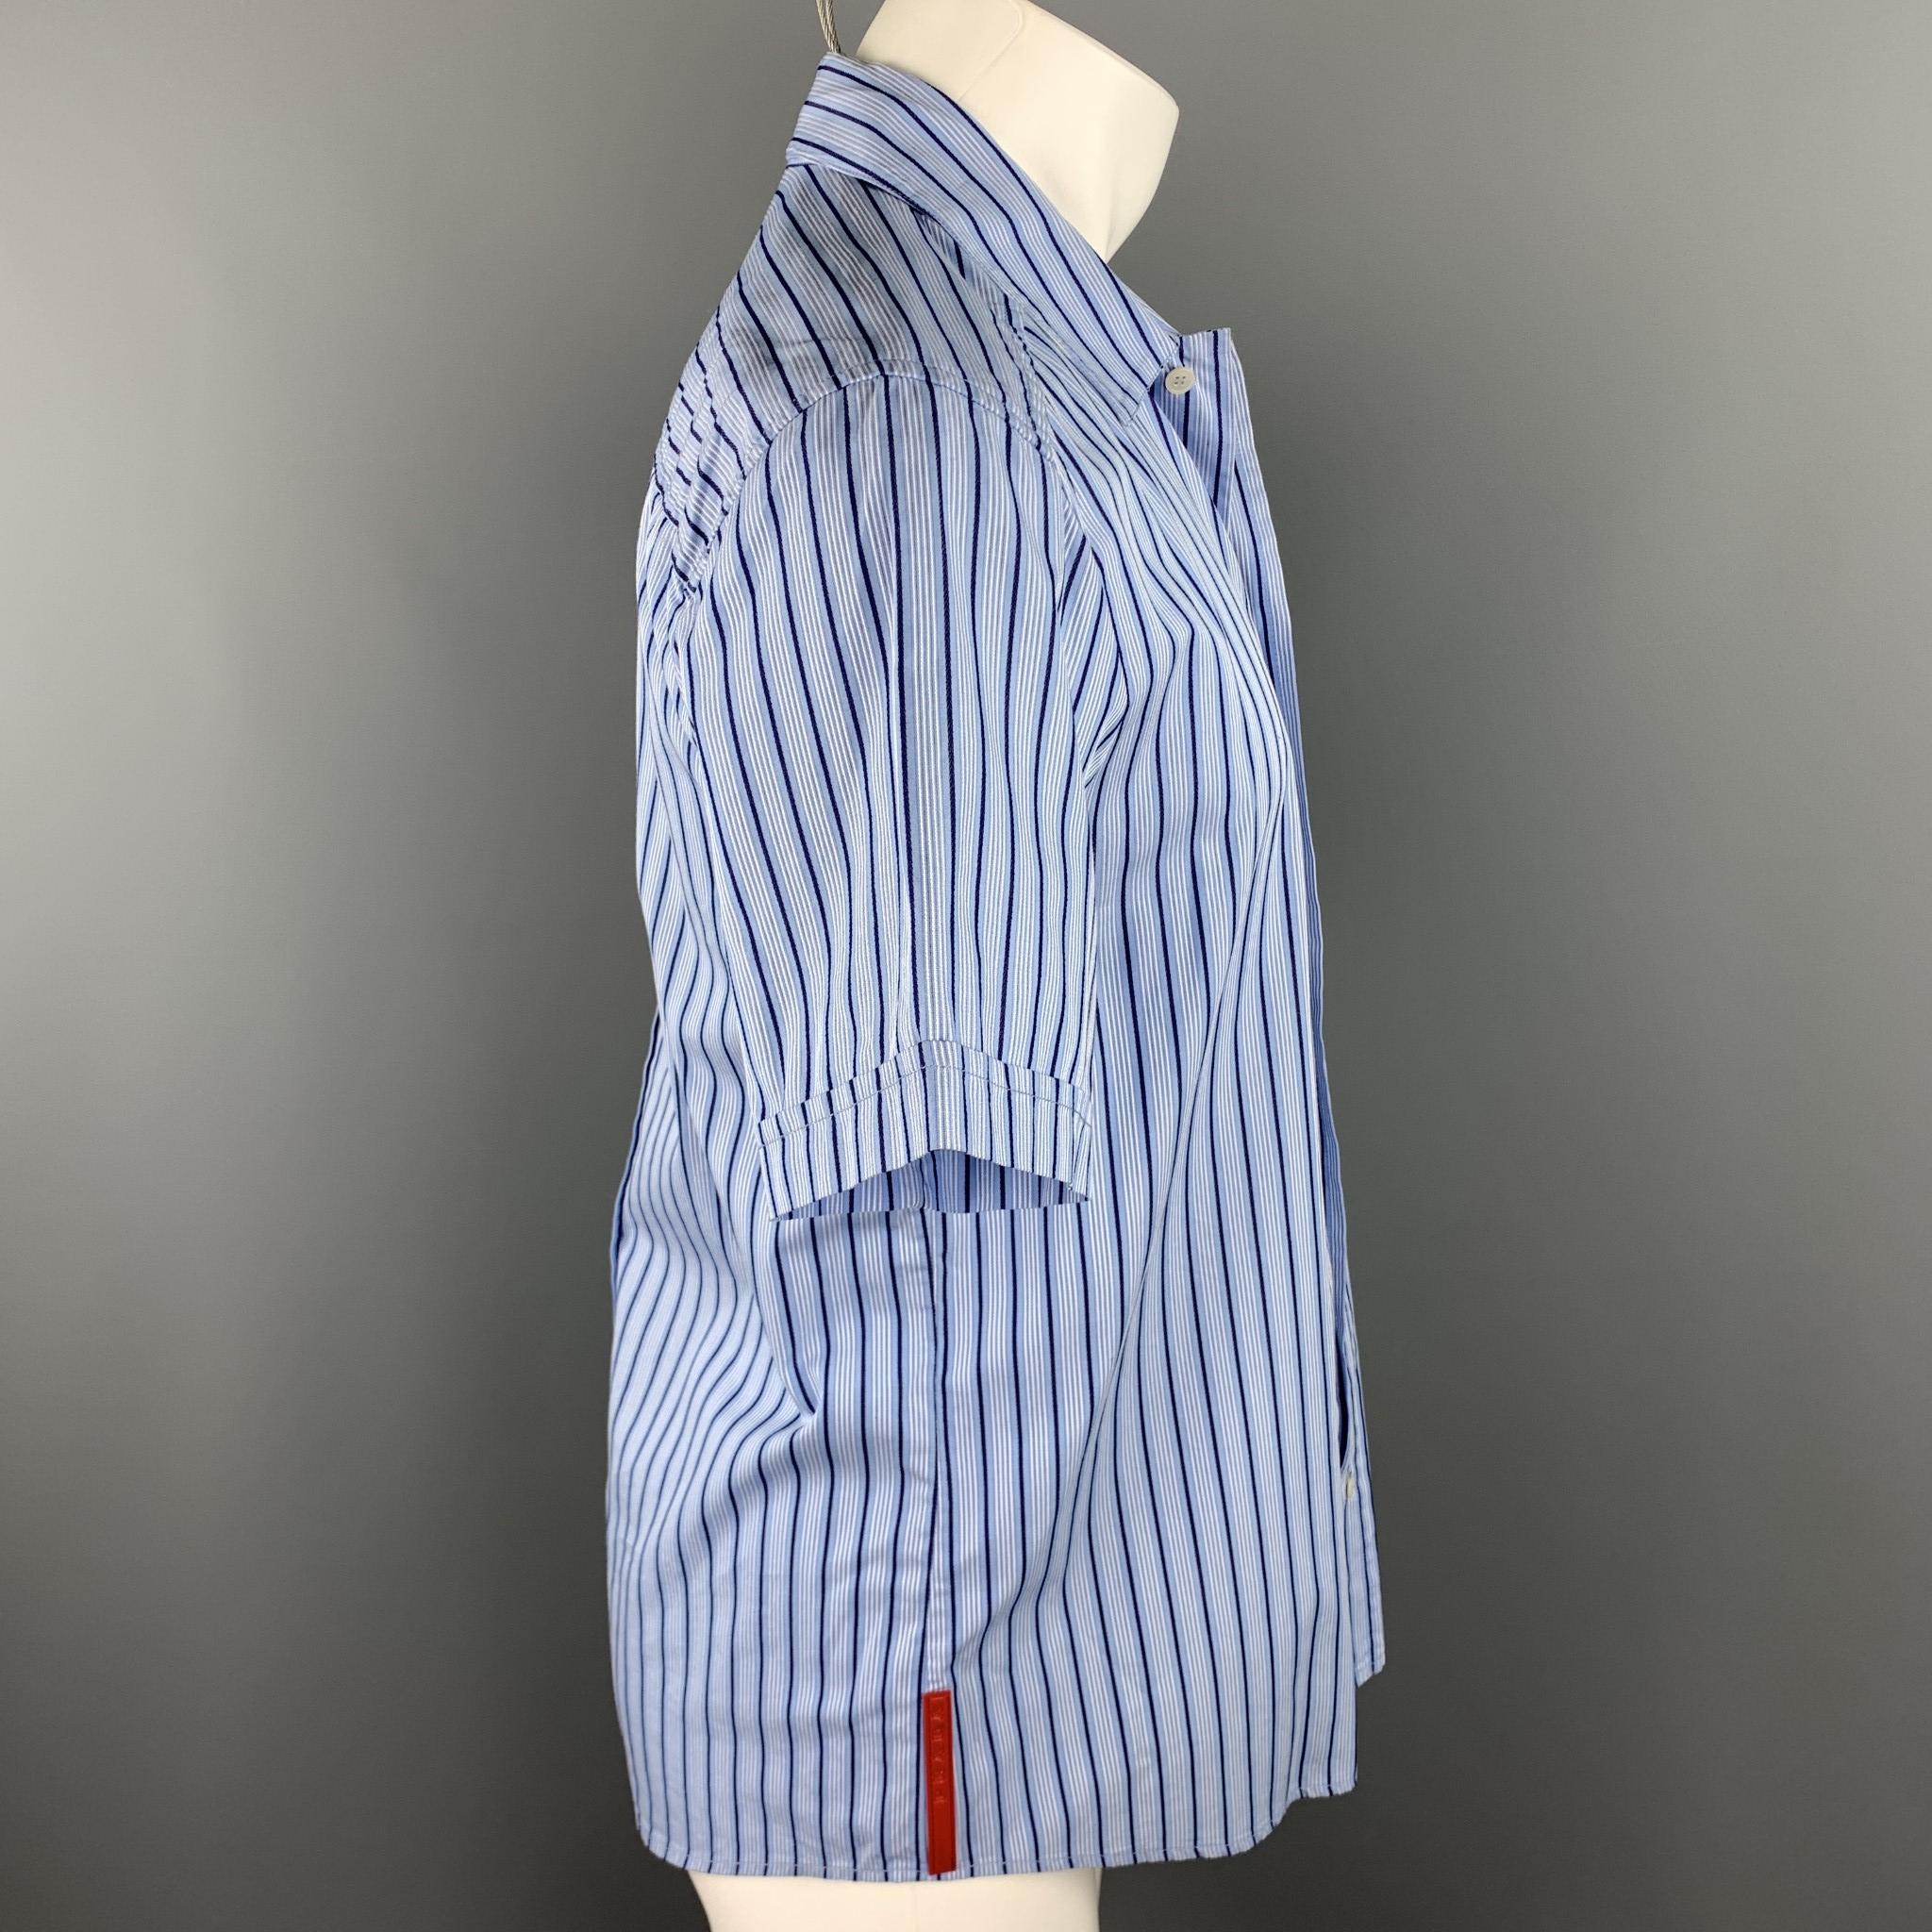 PRADA short sleeve shirt comes in a blue stripe cotton featuring a button up style and a spread collar. Made in Italy.

Excellent Pre-Owned Condition.
Marked: M

Measurements:

Shoulder: 18 in.
Chest: 42 in. 
Sleeve: 9 in. 
Length: 28 in. 